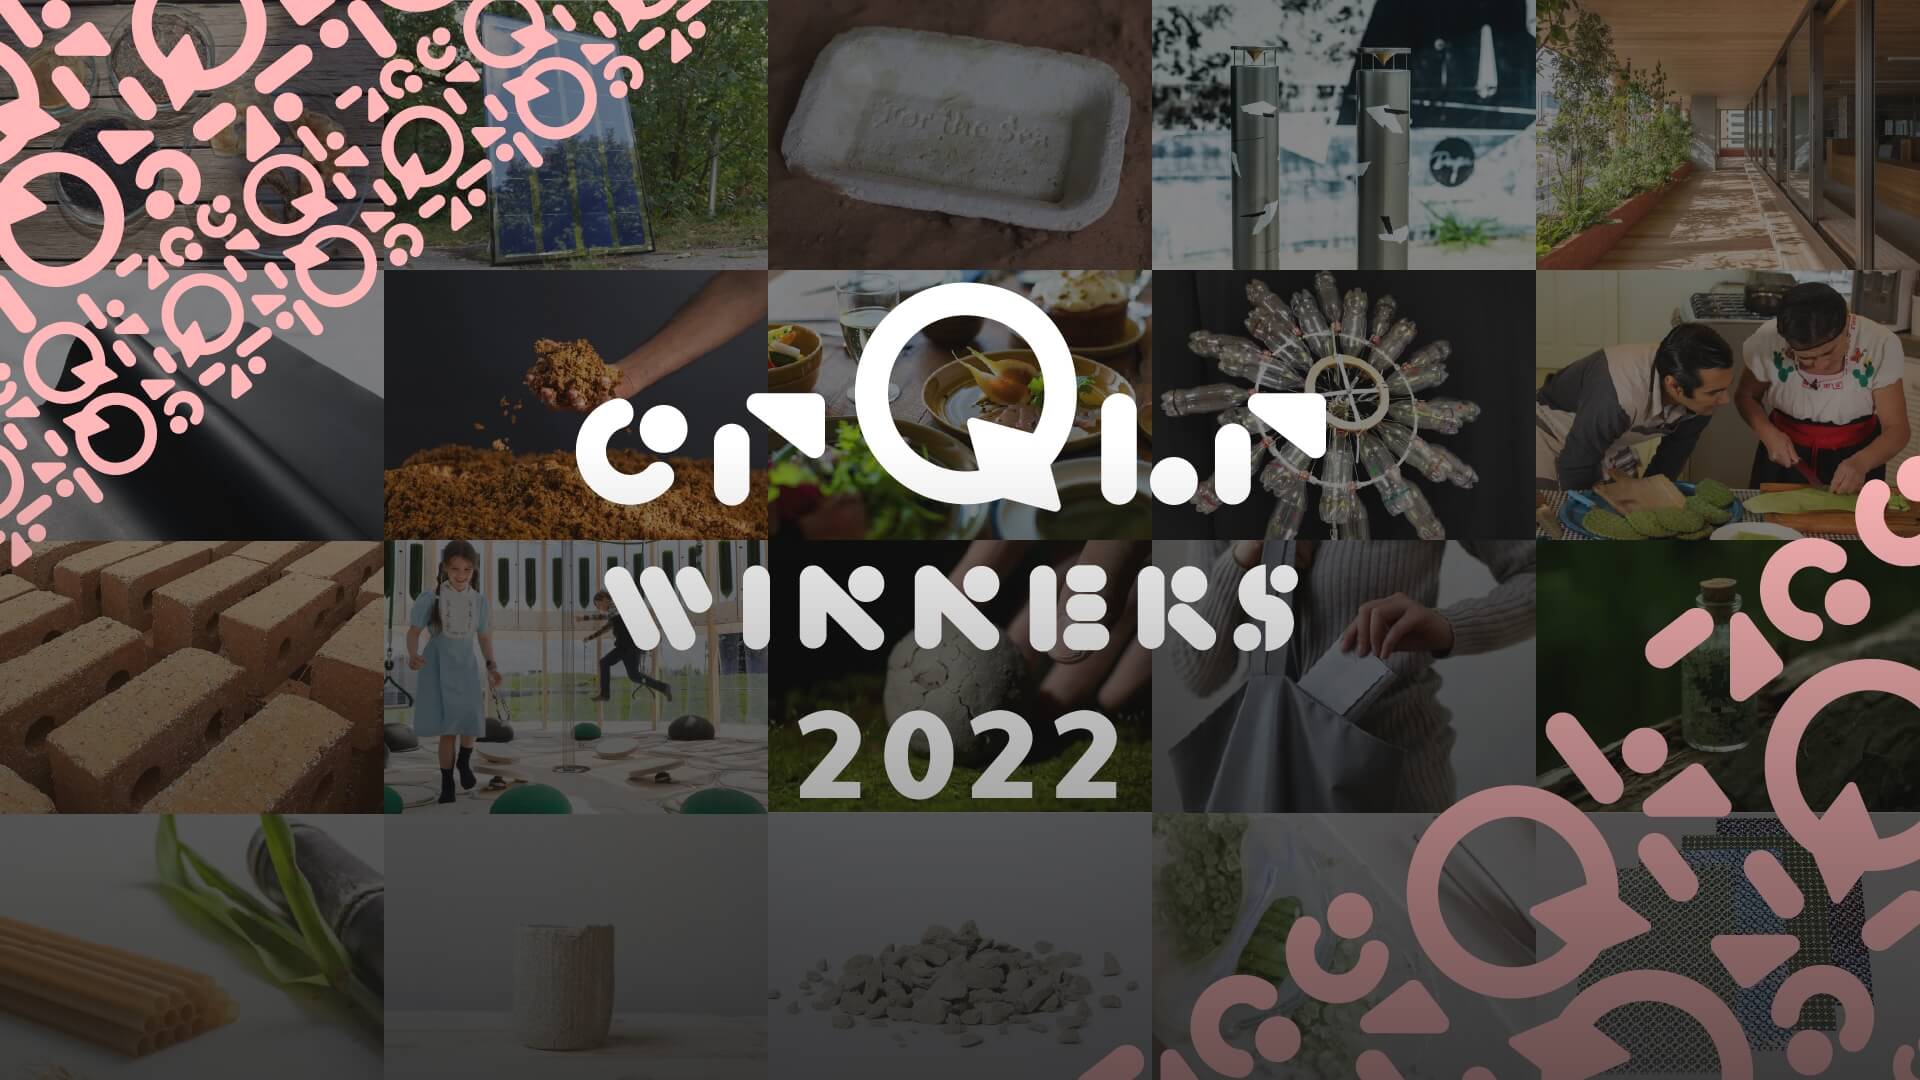 Announcing the 2022 crQlr Award winners!